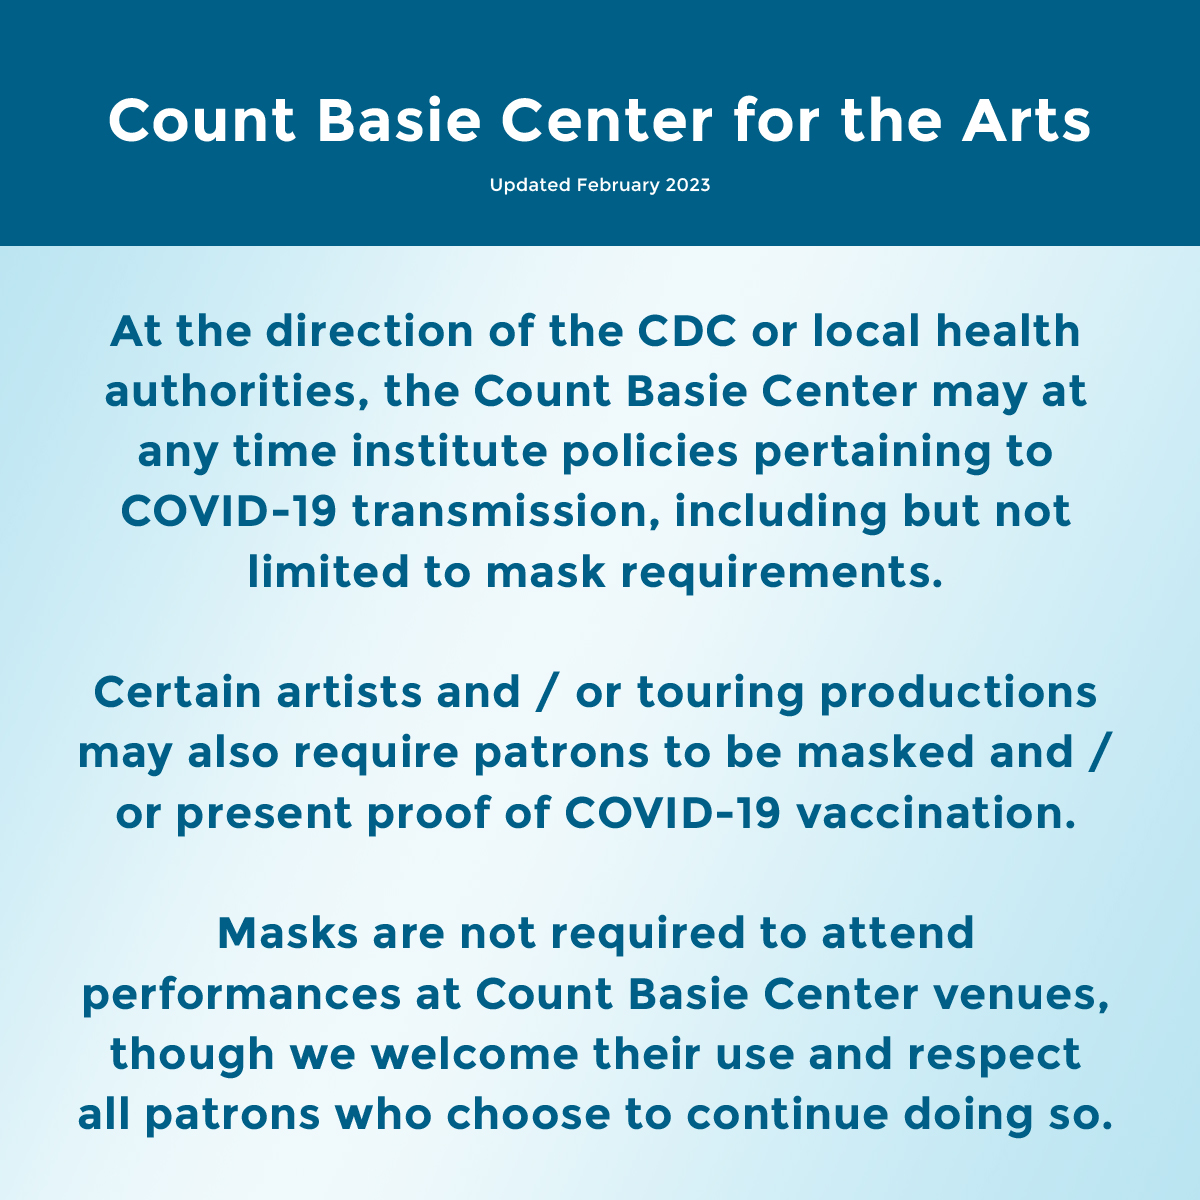 At the direction of the CDC or local health
authorities, the Count Basie Center may at
any time institute policies pertaining to
COVID-19 transmission, including but not
limited to mask requirements.

Certain artists and / or touring productions
may also require patrons to be masked and /
or present proof of COVID-19 vaccination.

Masks are not required to attend
performances at Count Basie Center venues,
though we welcome their use and respect
all patrons who choose to continue doing so.